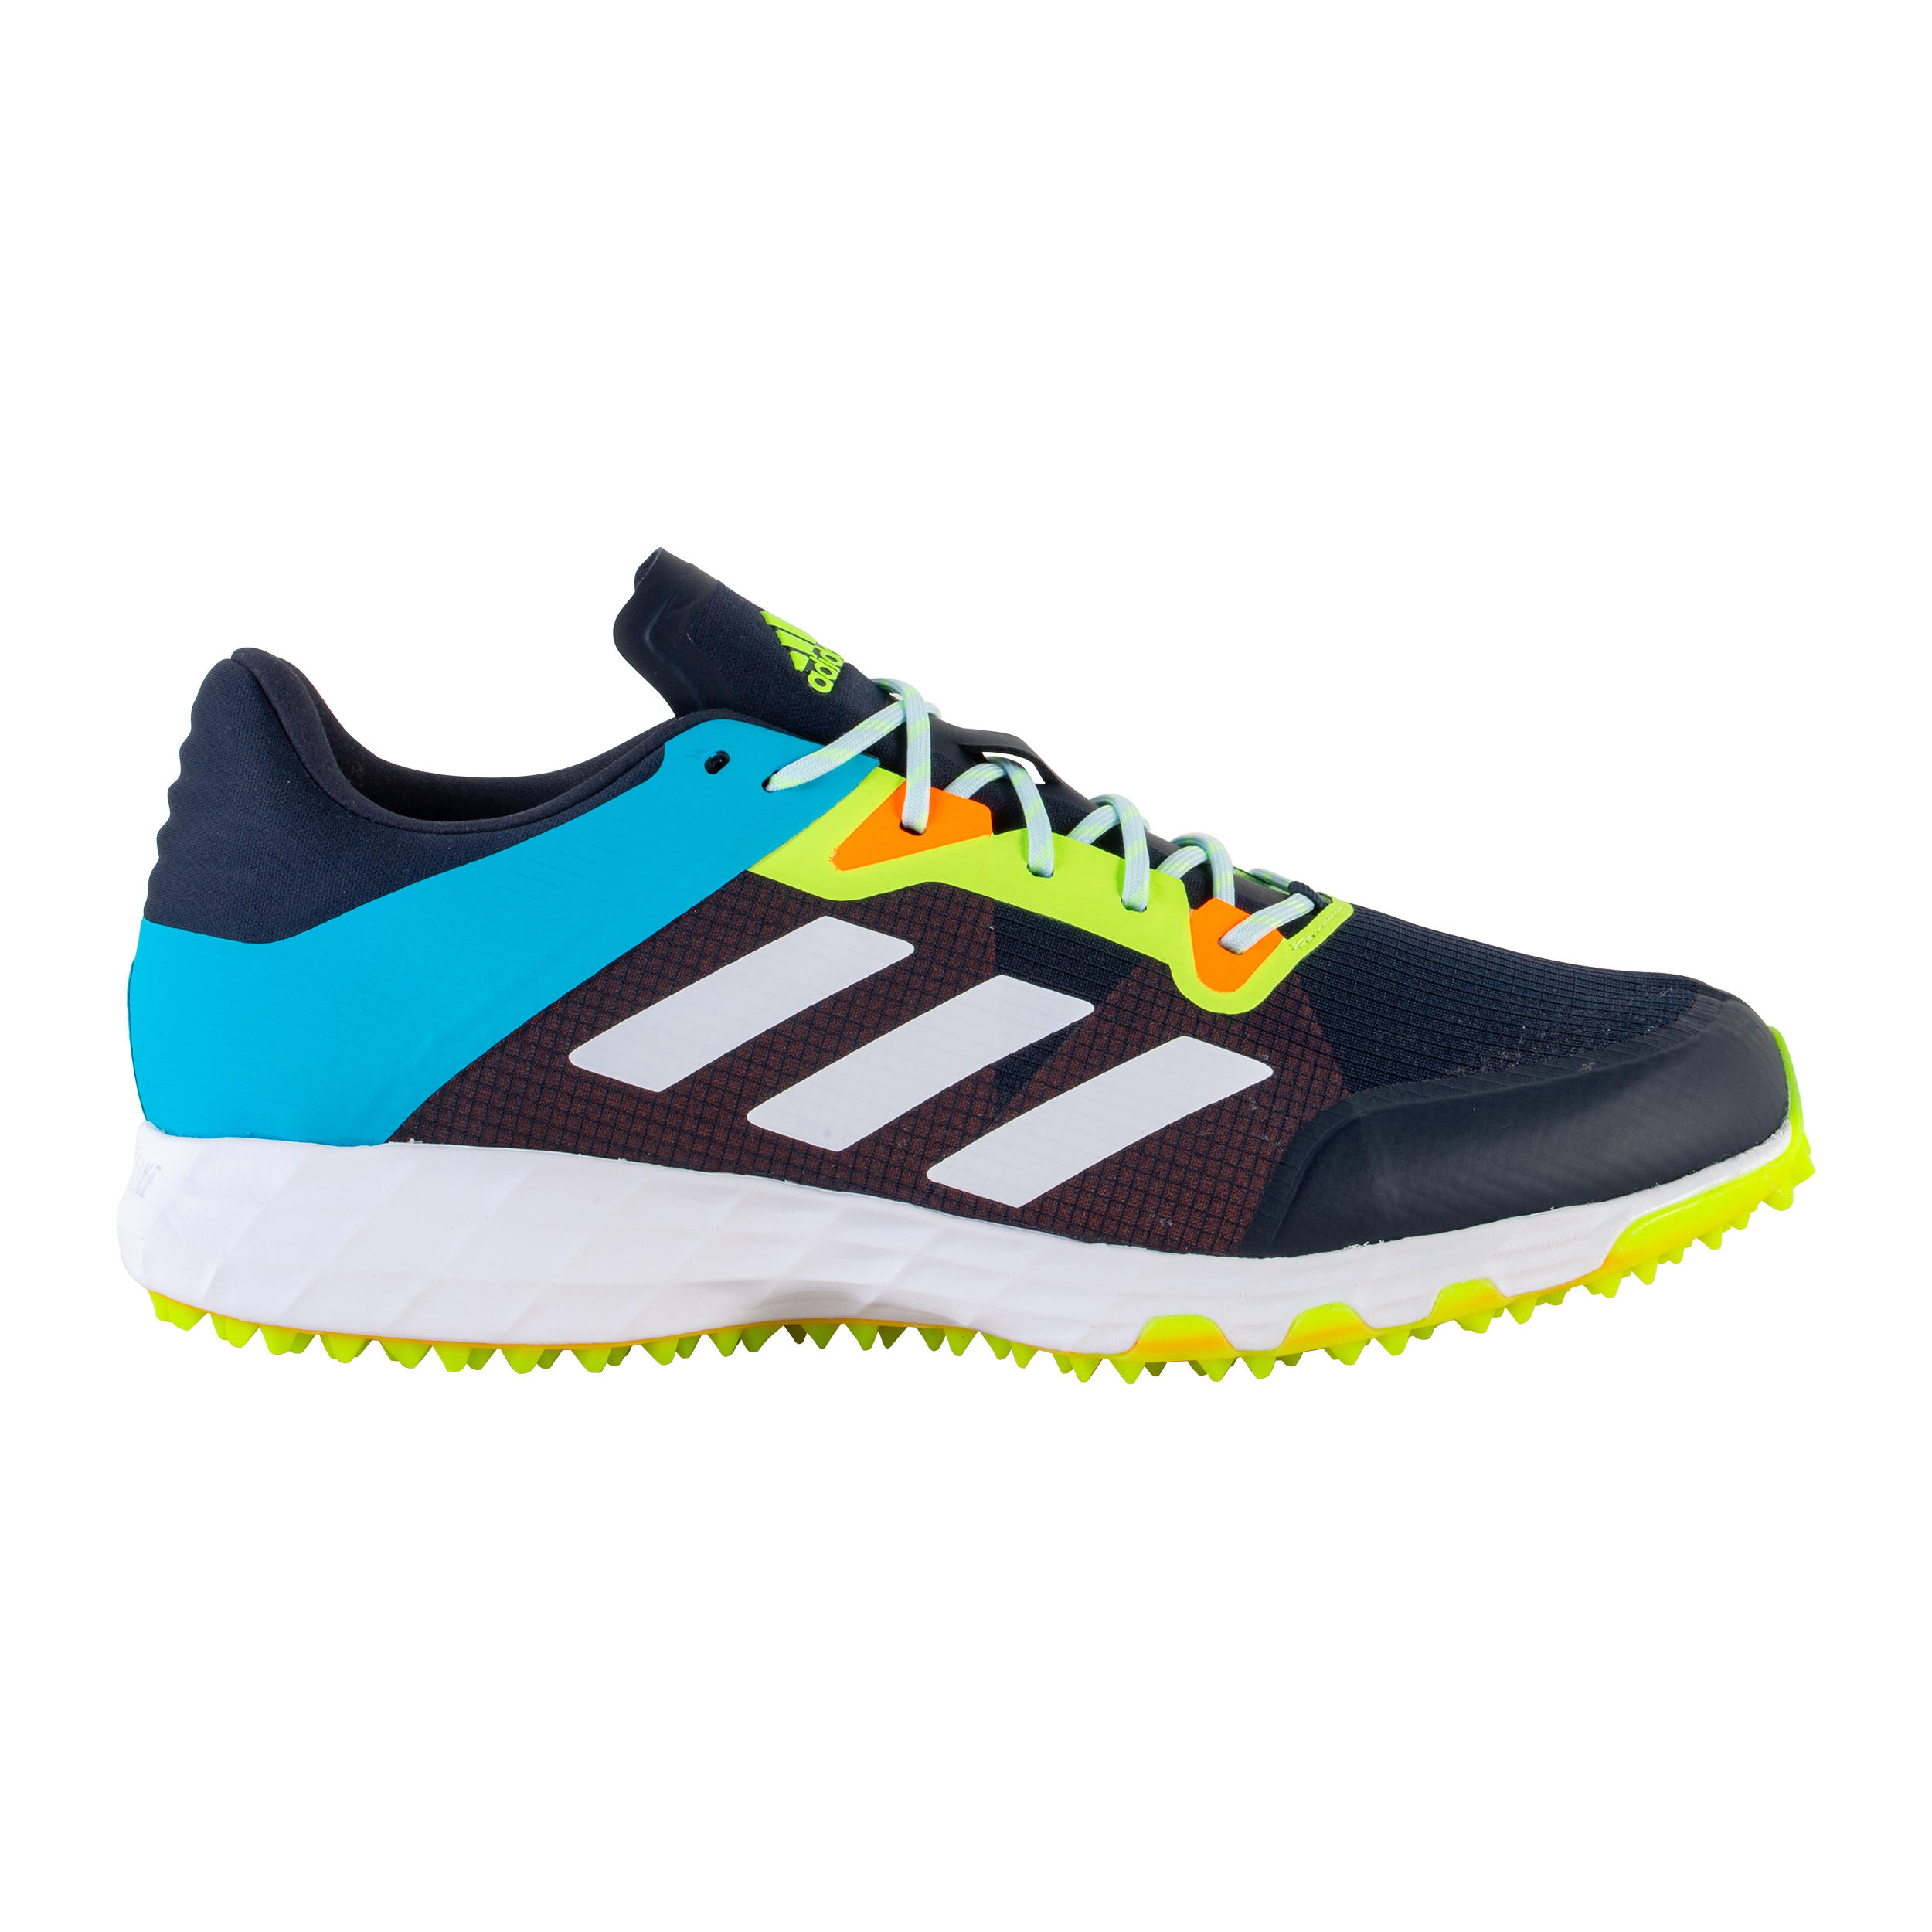 ADIDAS Adult High-Intensity Field Hockey Shoes Lux 1.9S - Blue